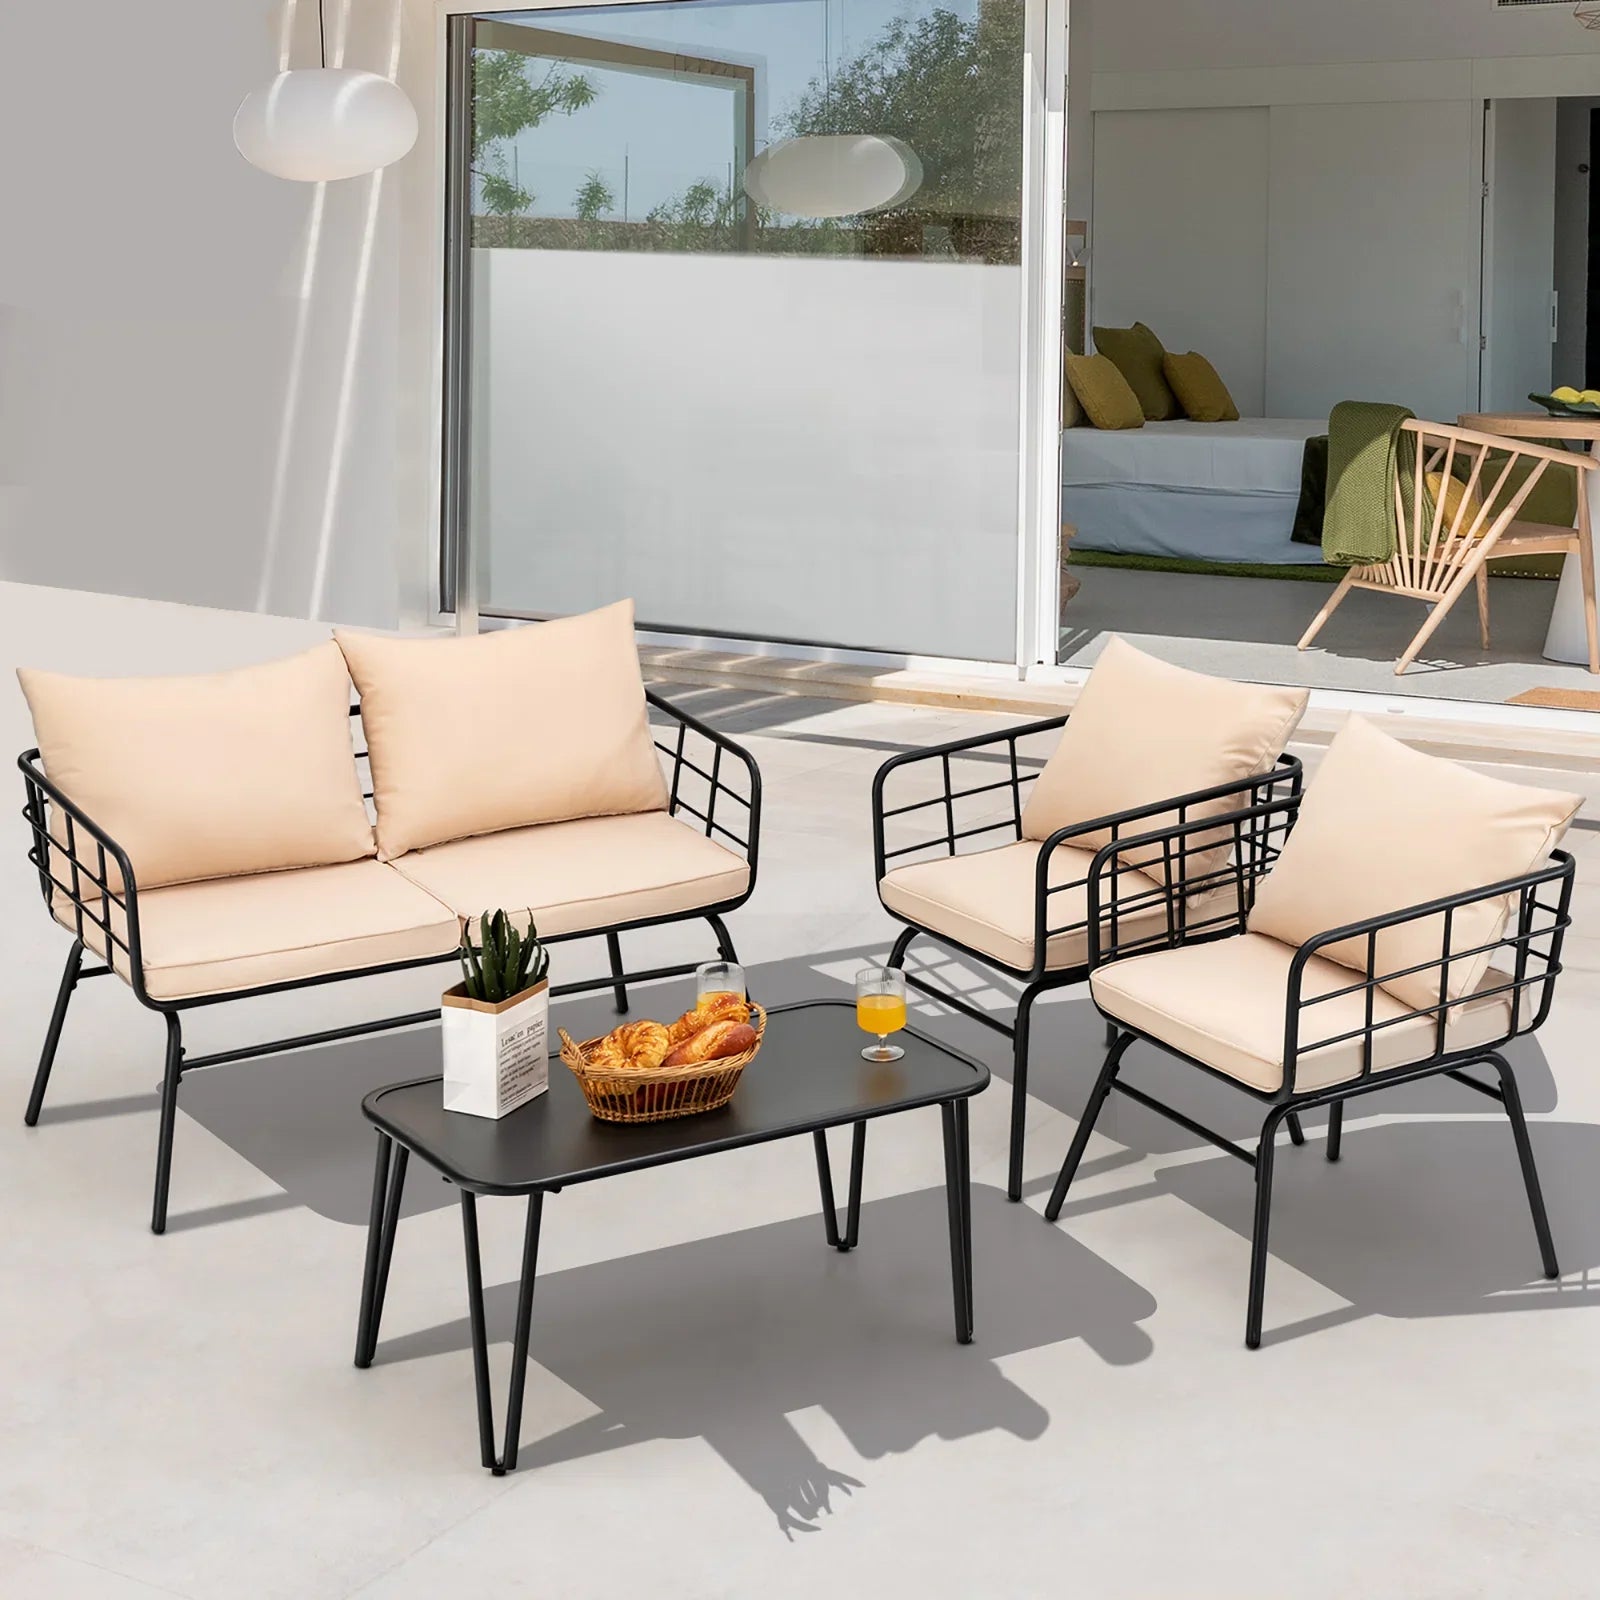 OUTDOOR SOFA SET 2 SEATER , 2 SINGLE SEATER AND 1 CENTER TABLE SET